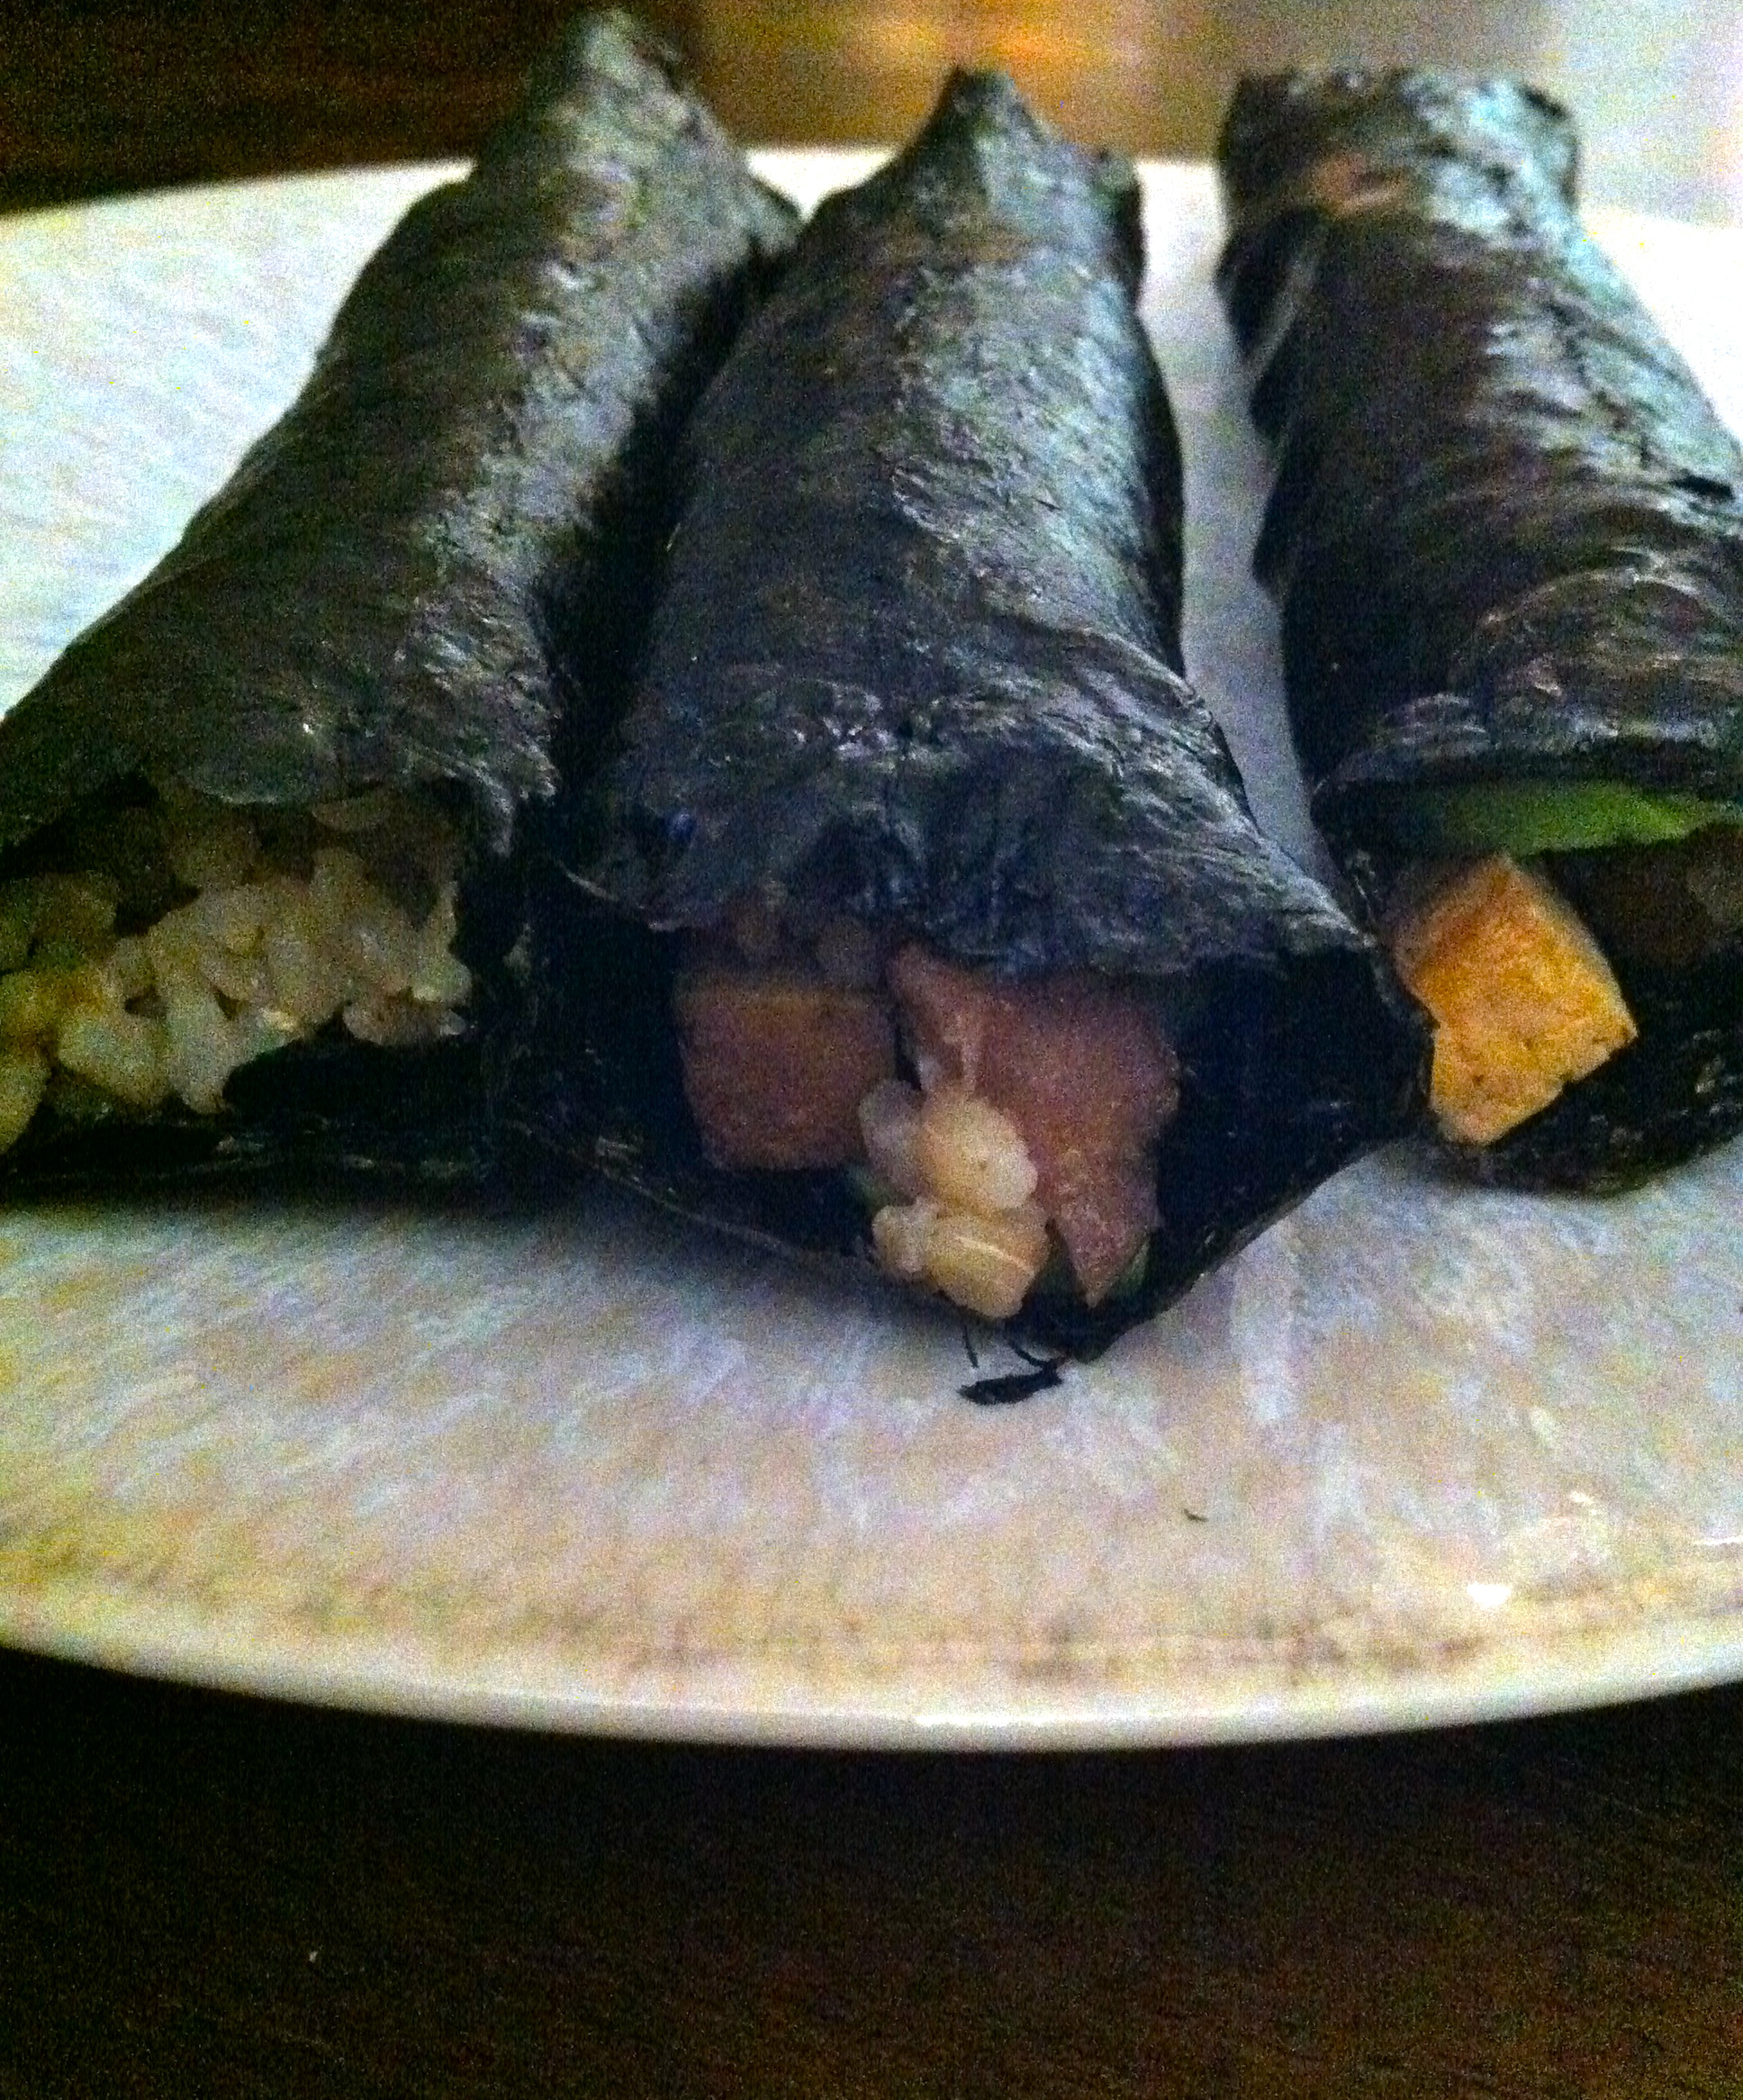 These nori rolls are filled with avocado and tofu and brown rice and chestnuts!